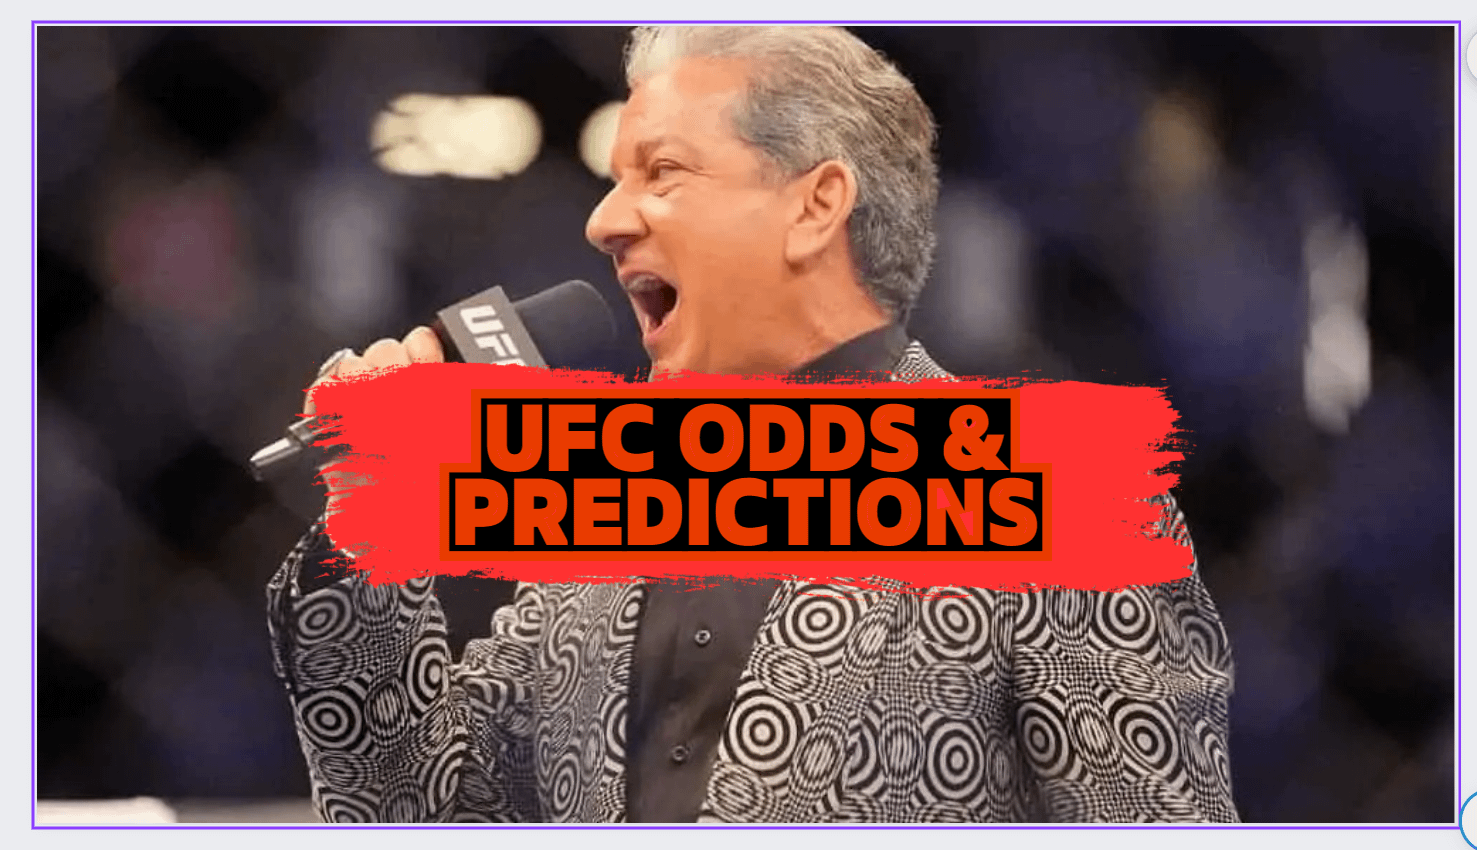 https://mld9m31eb7ss.i.optimole.com/w:auto/h:auto/q:mauto/f:avif/https://www.oddsshopper.com/wp-content/uploads/2023/07/The-best-UFC-291-predictions.-Using-industry-leading-tools-lets-give-our-Stephen-Thompson-Michel-Pereira-pick-odds-and-prediction.png